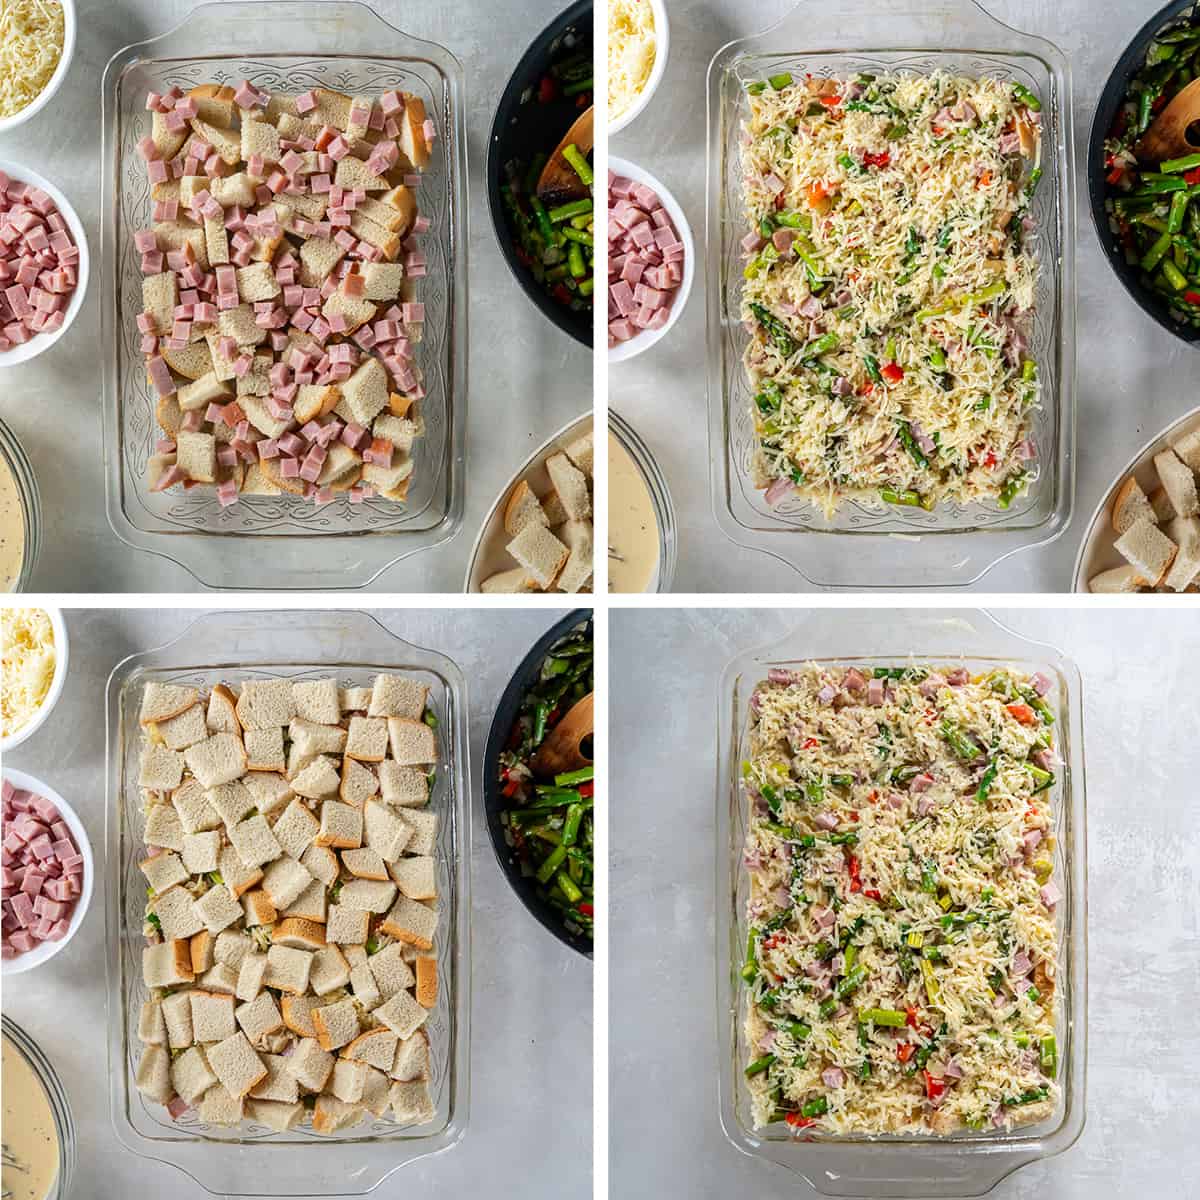 Four images of cubed bread, ham, cheese and other ingredients being layered in a baking dish.